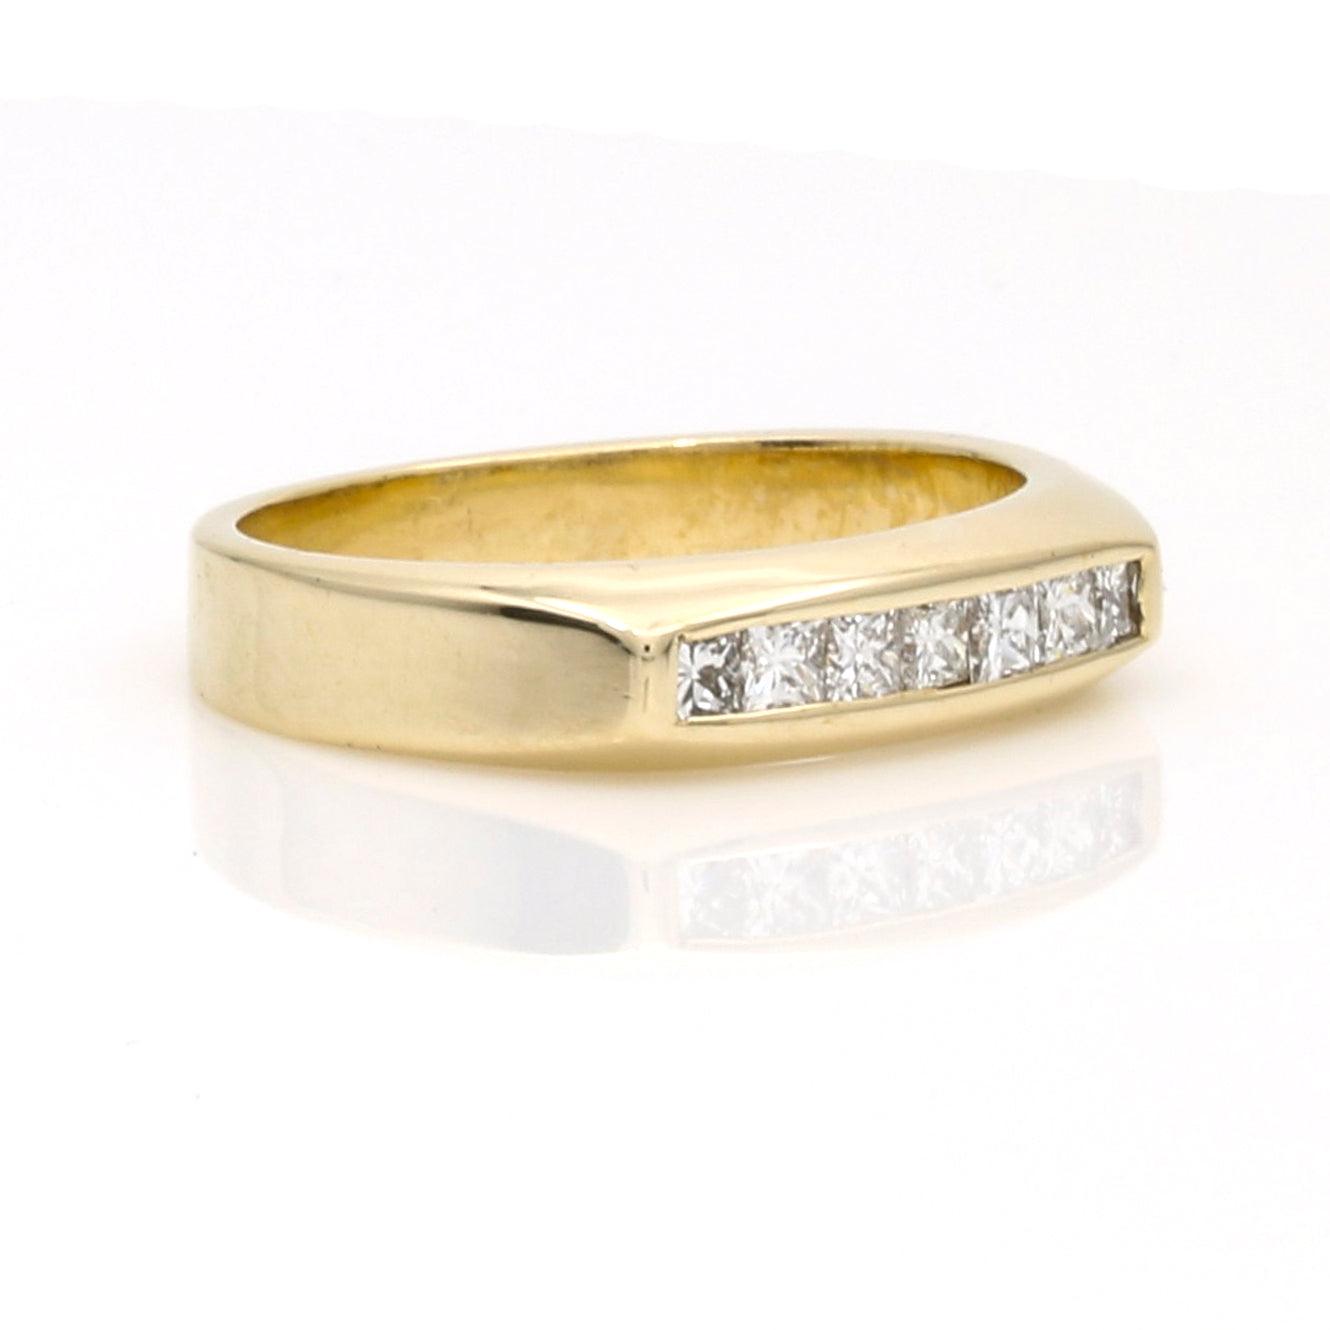 Men's Princess-Cut Diamond Channel Band Ring in 14k Yellow Gold 1.00 cttw - 31 Jewels Inc.